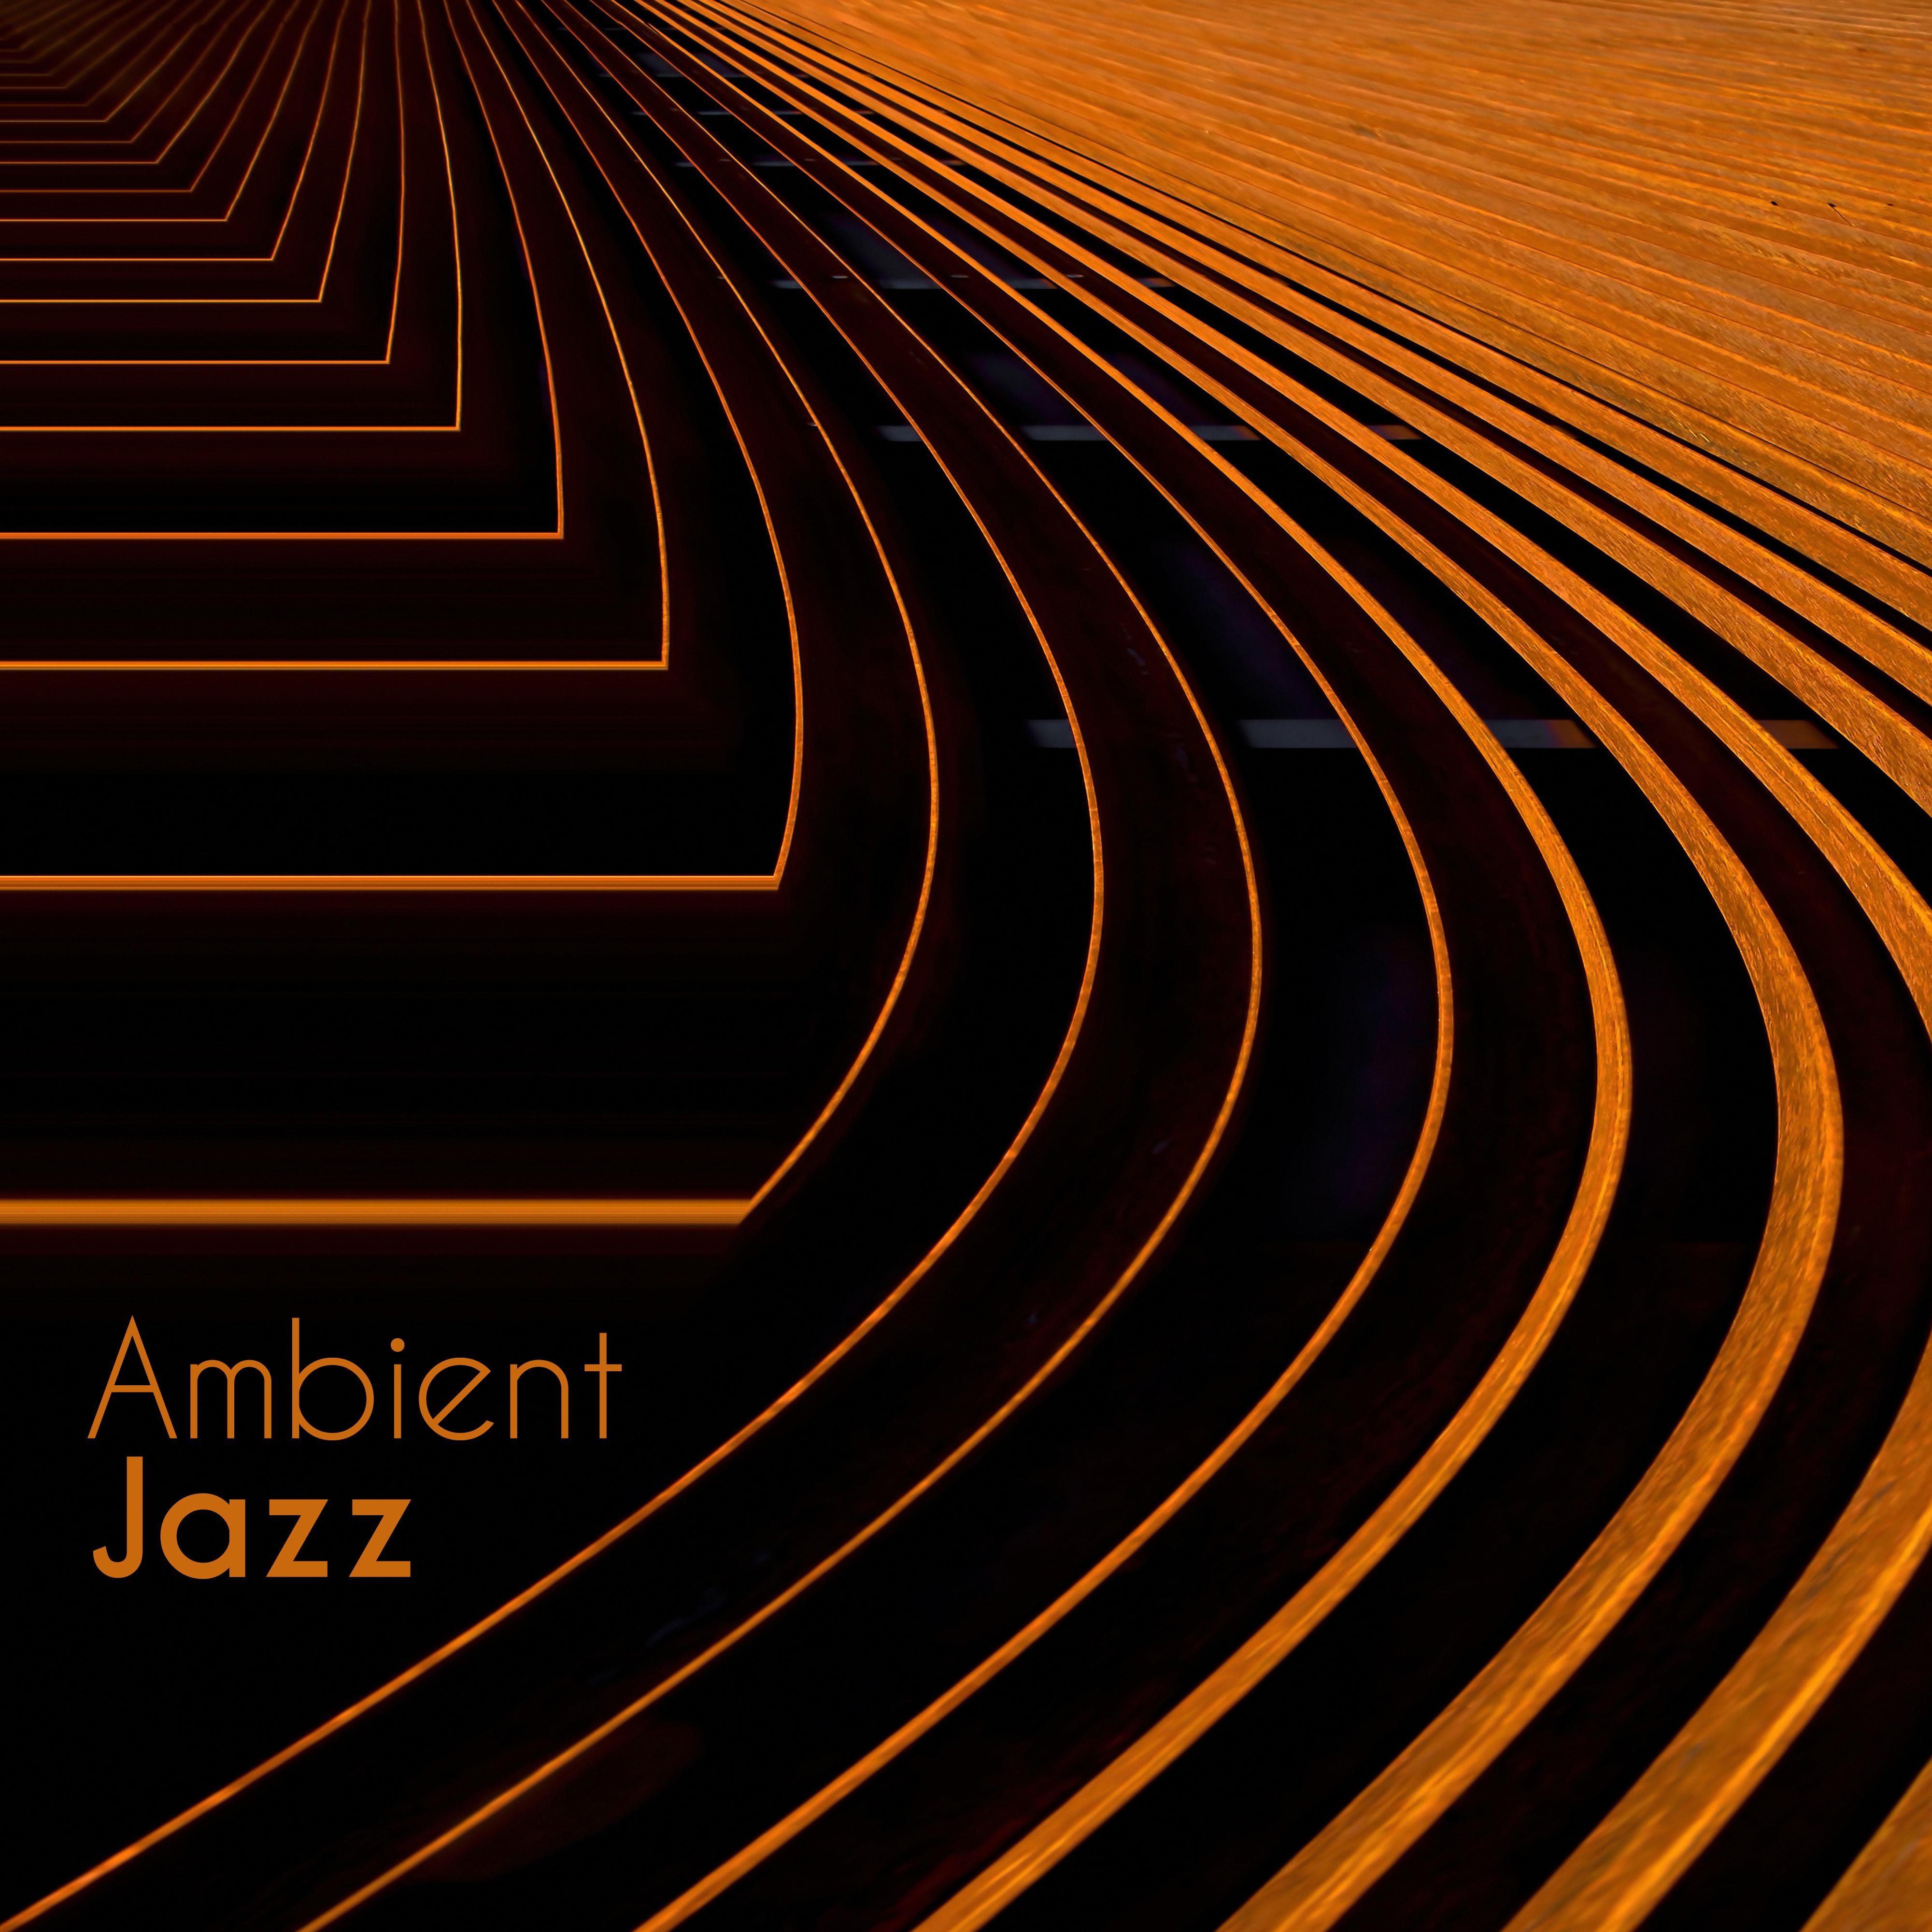 Ambient Jazz: Smooth Jazz for Relaxation, Sleep, Restaurant, Coffee Jazz, Romantic Songs, Gentle Jazz Collection 2019